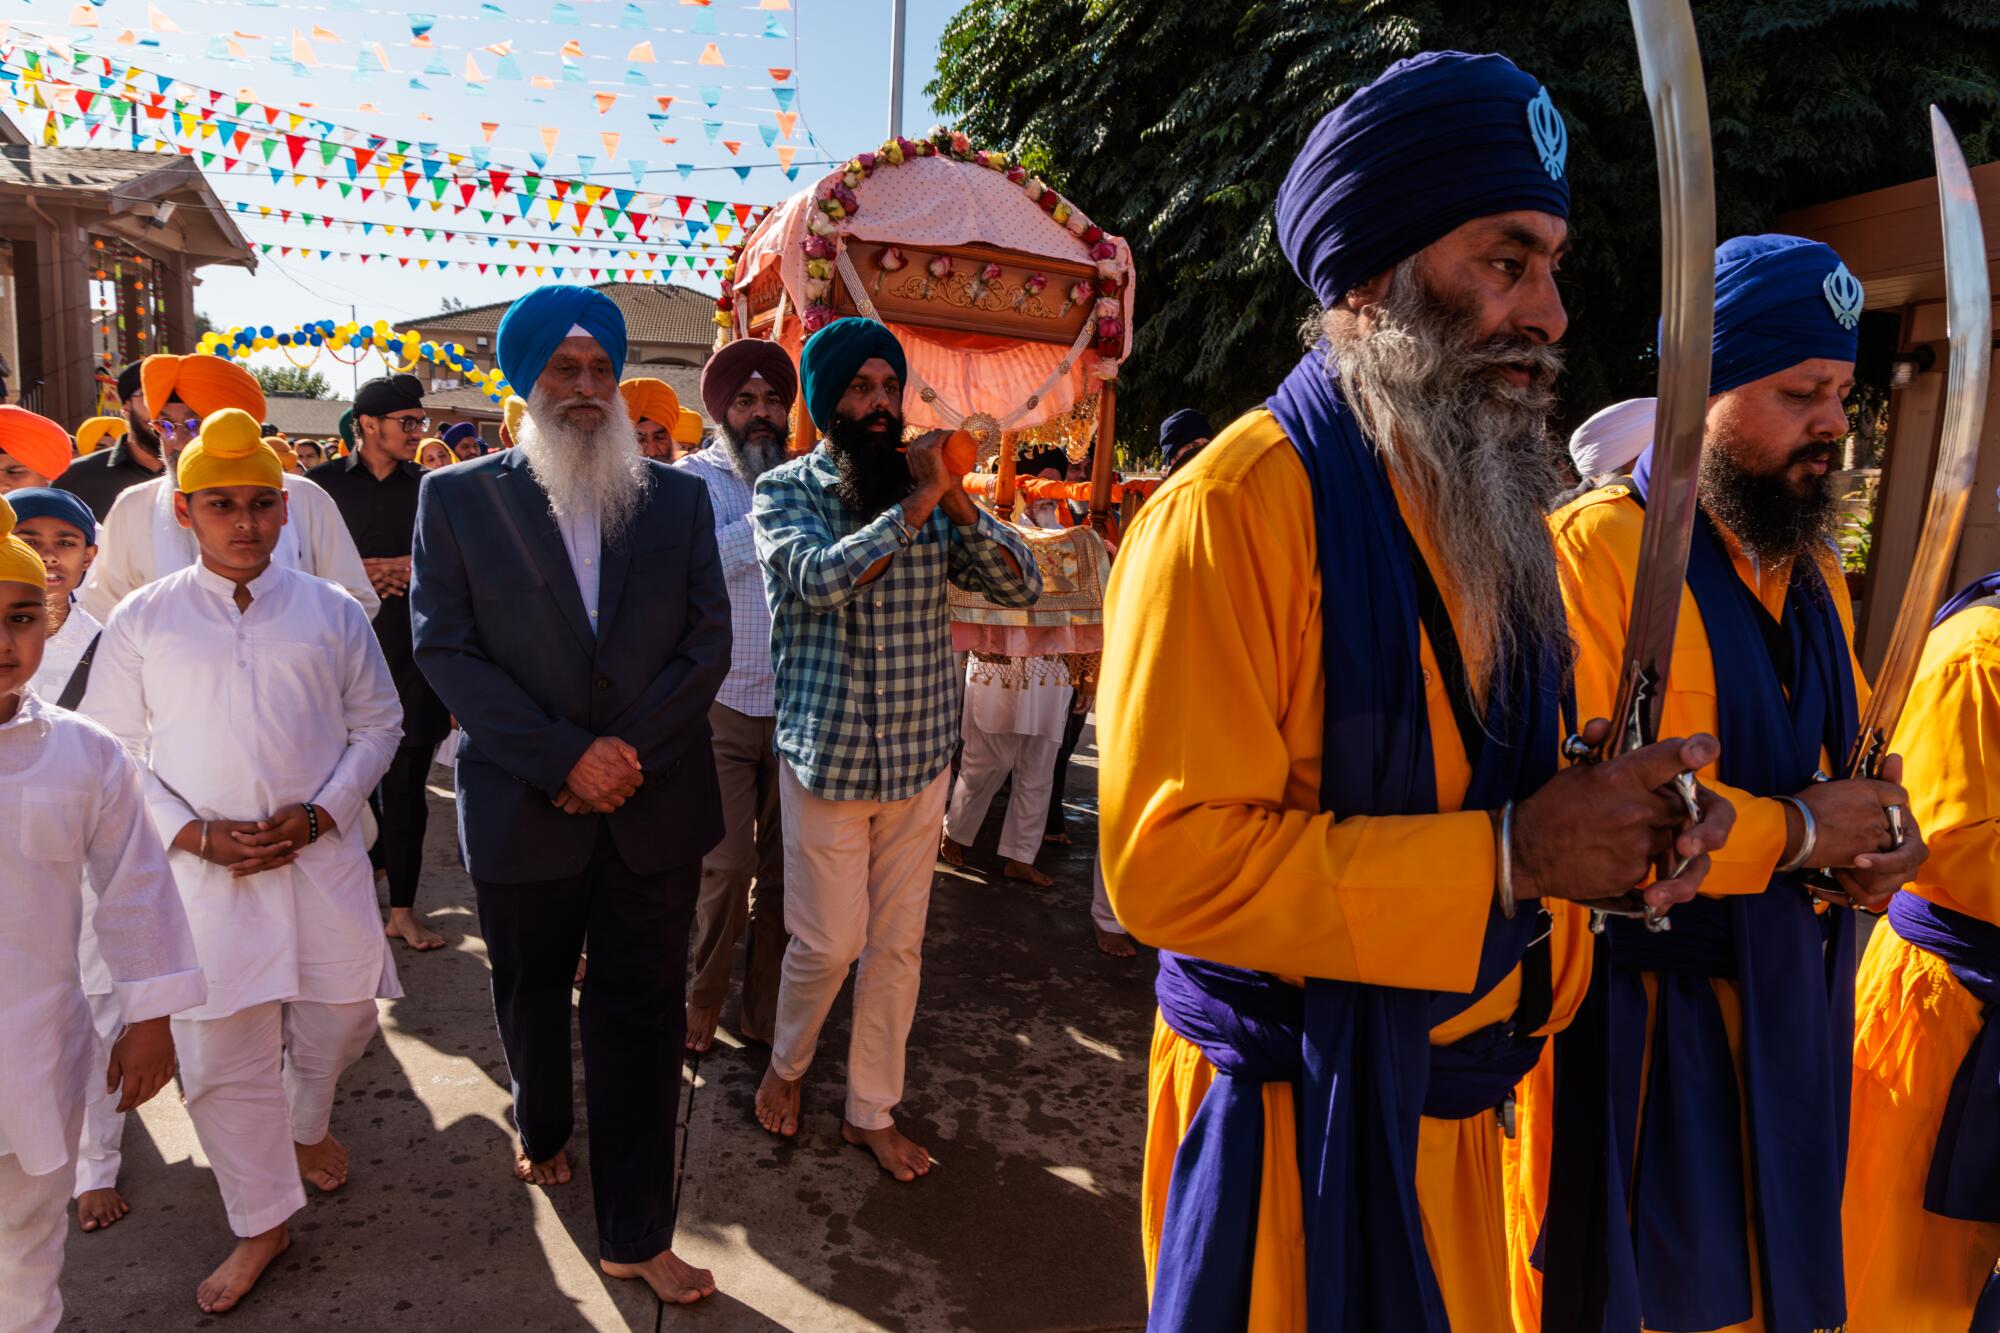 Two men with beards, wearing blue turbans and gold robes, hold swords as they walk in front of other people in turbans 